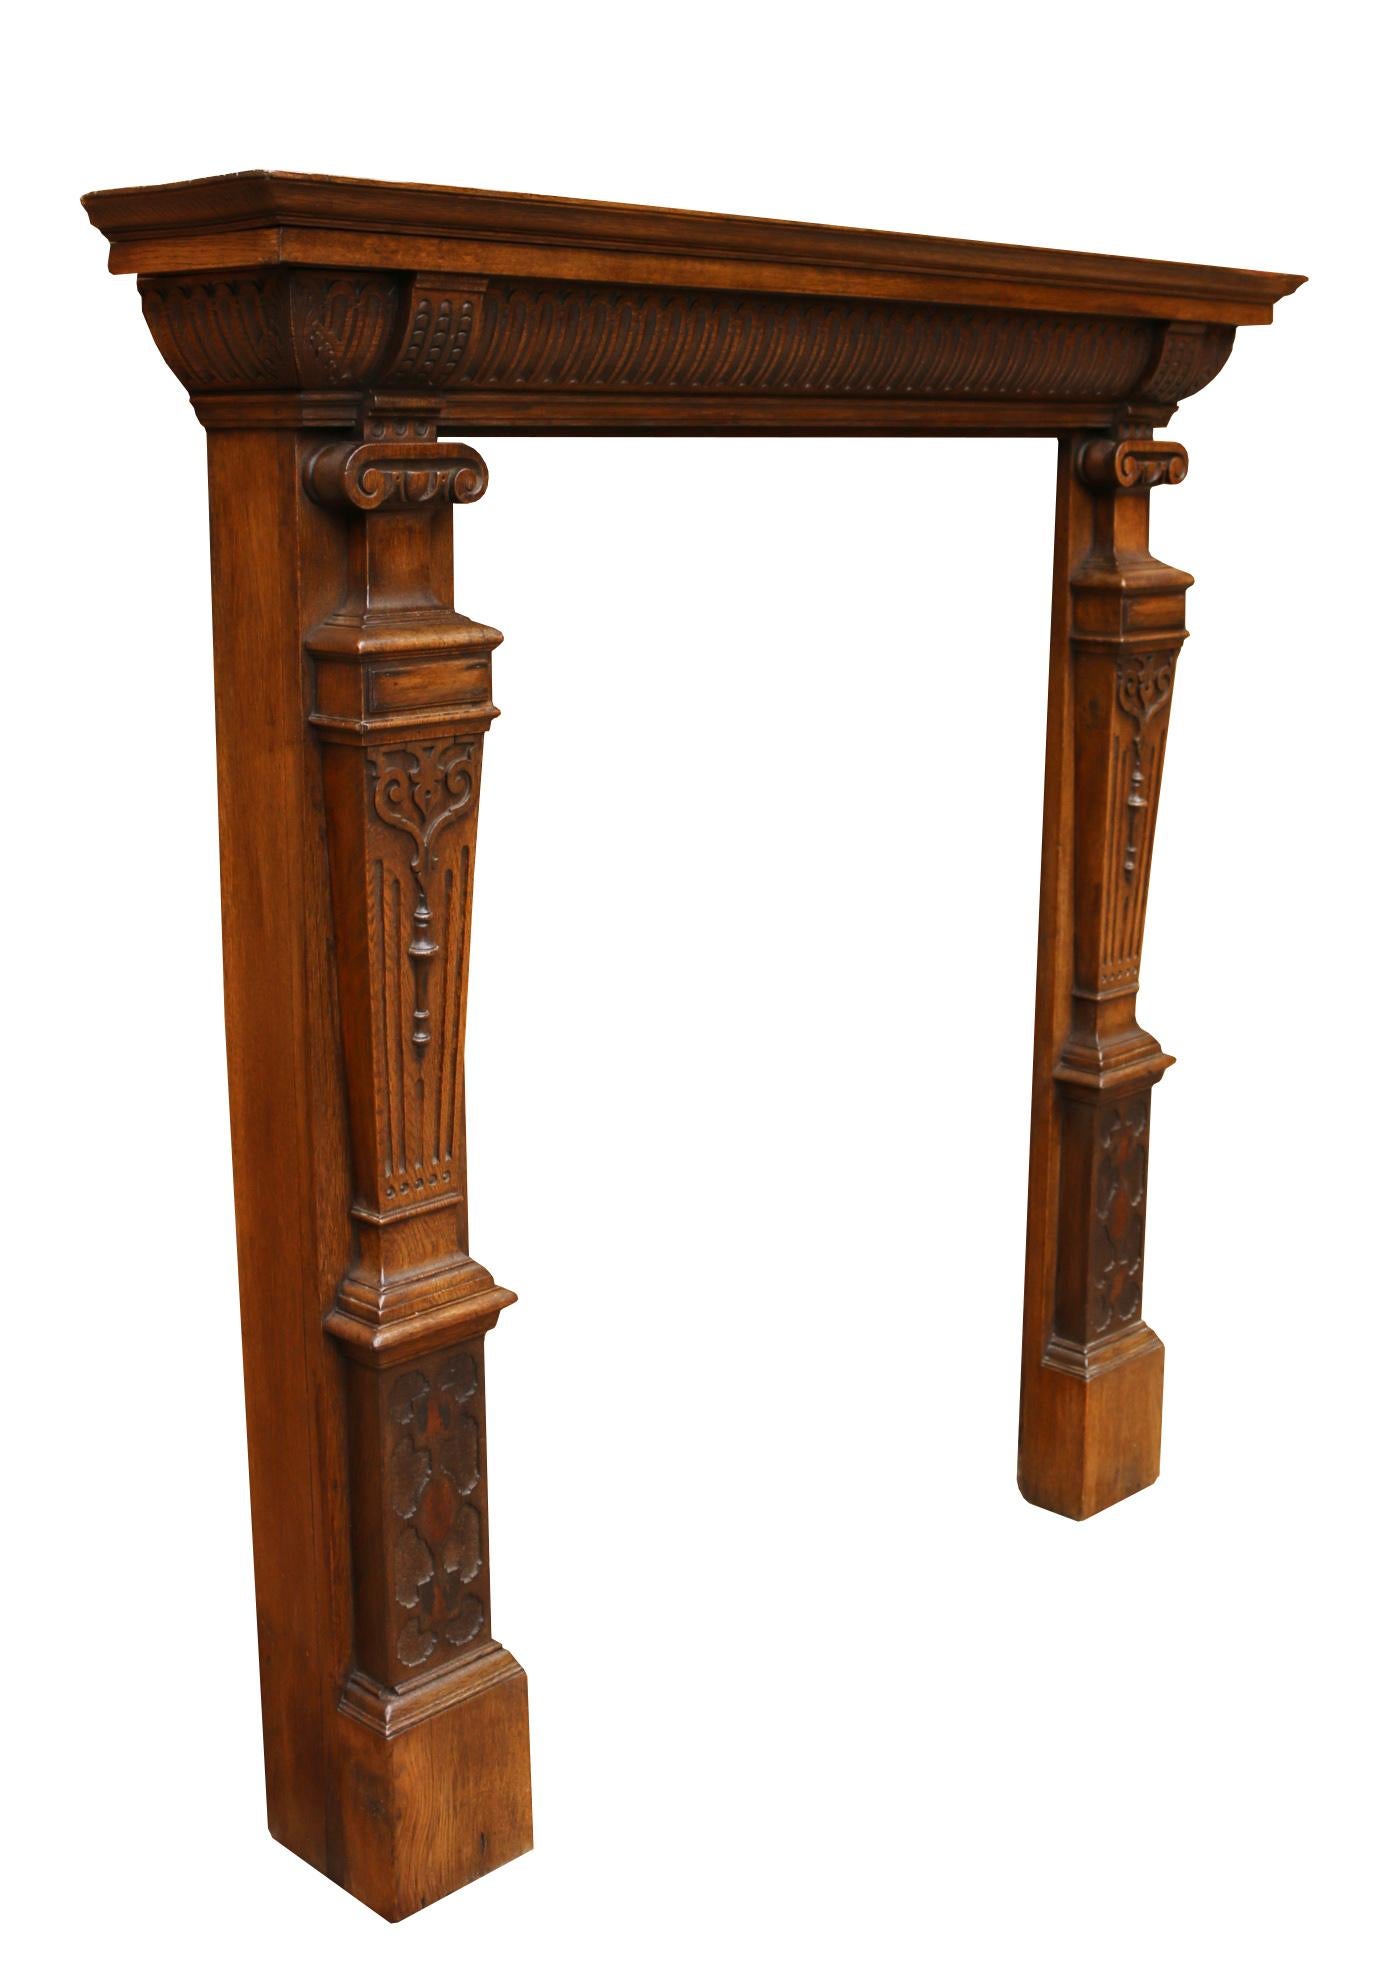 19th Century Antique English Carved Oak Fire Mantel For Sale